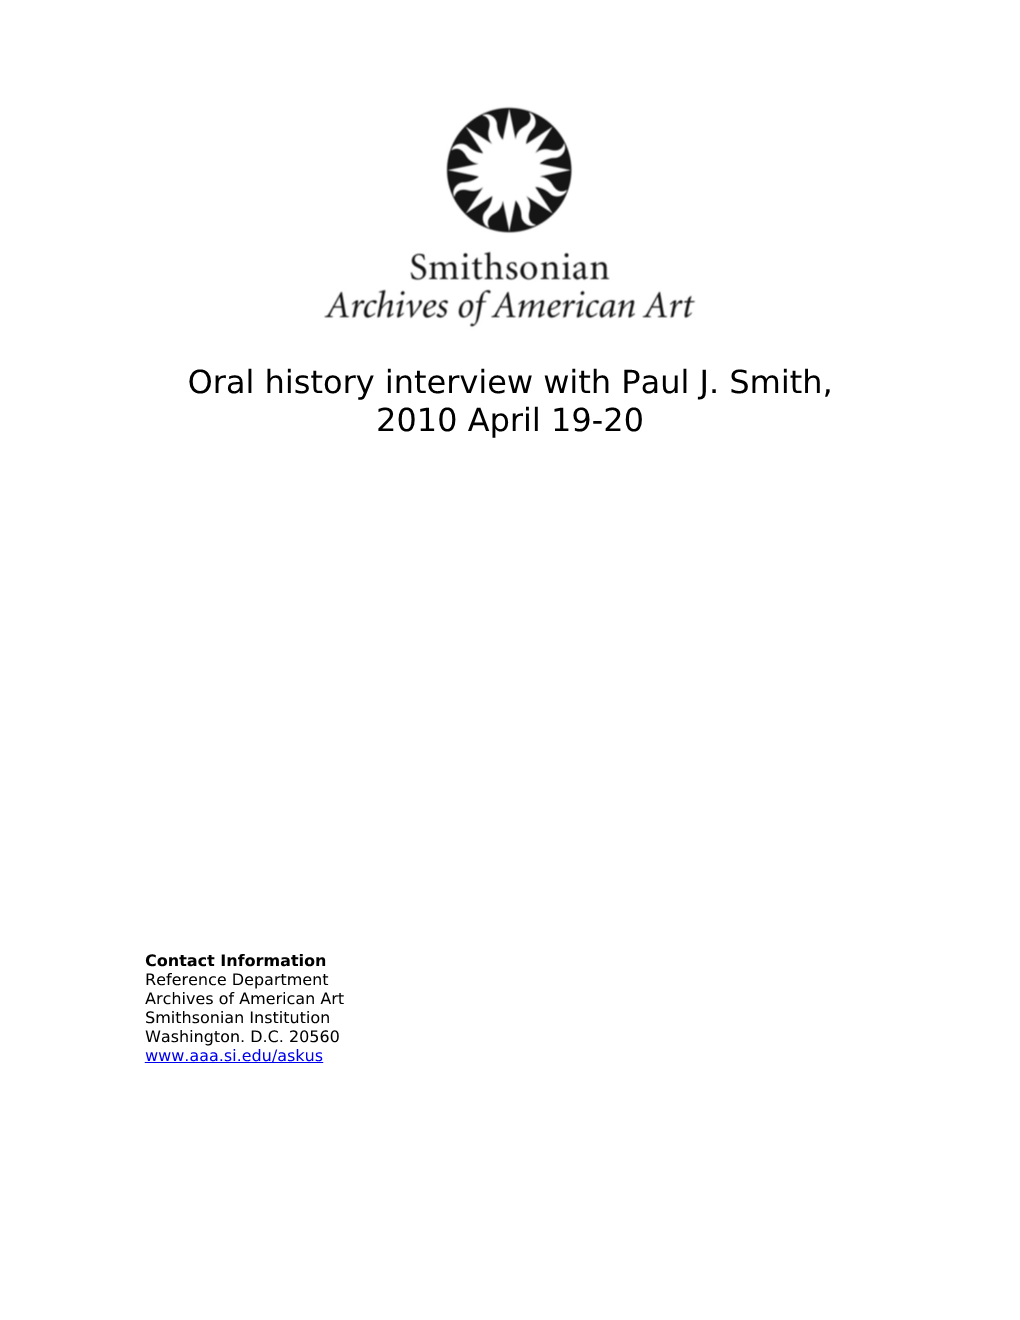 Oral History Interview with Paul J. Smith, 2010 April 19-20